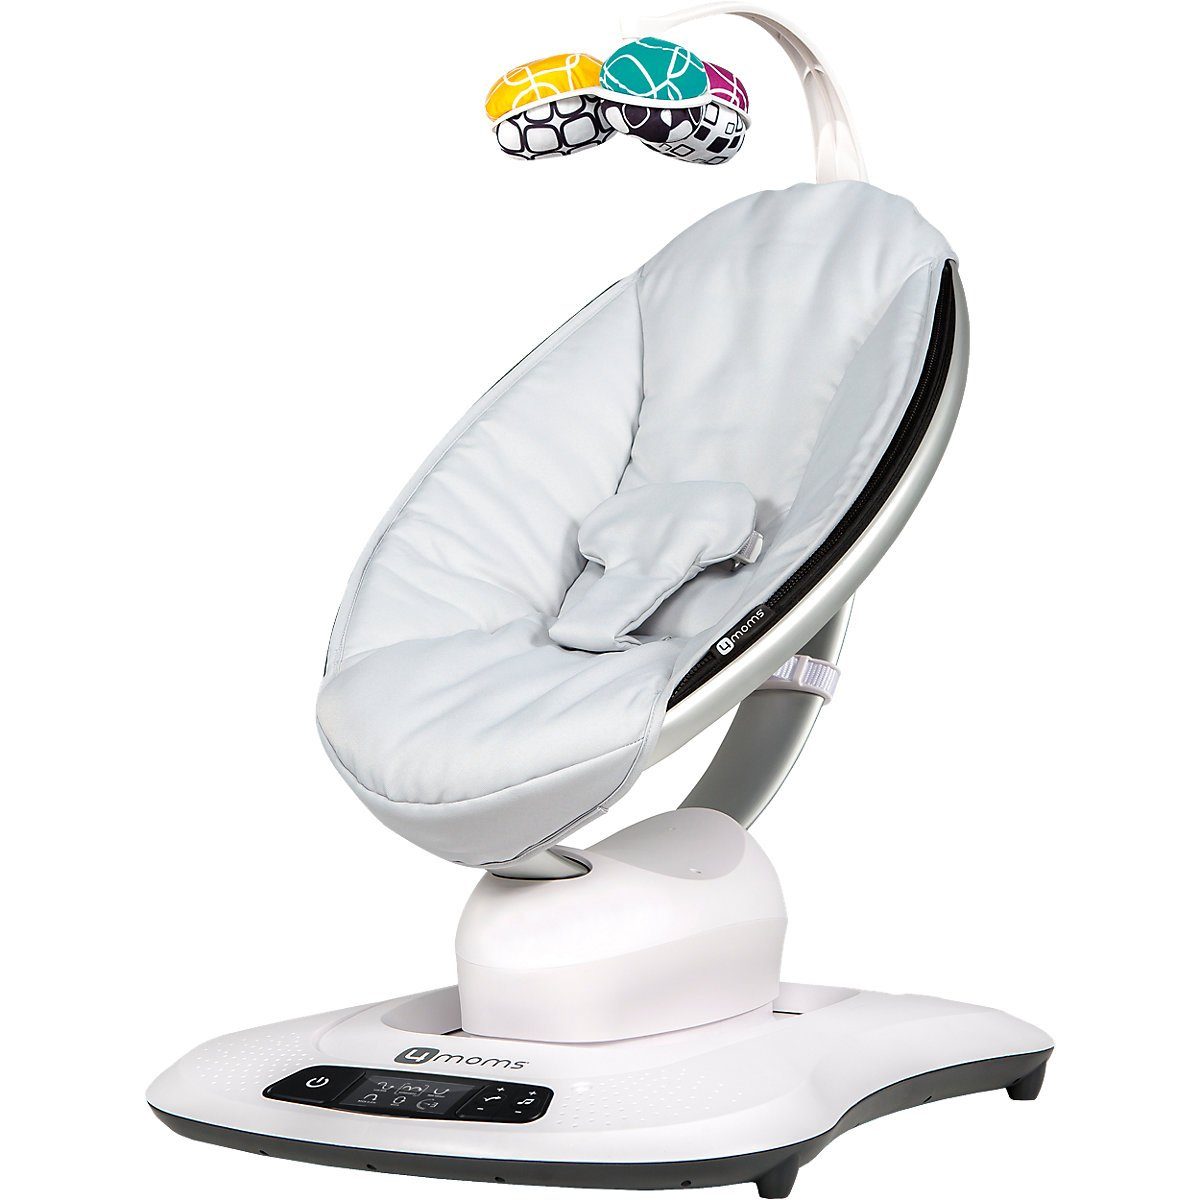 Kinder Babywippen 4moms Babywippe Wippe mamaRoo 4, Classic Grey